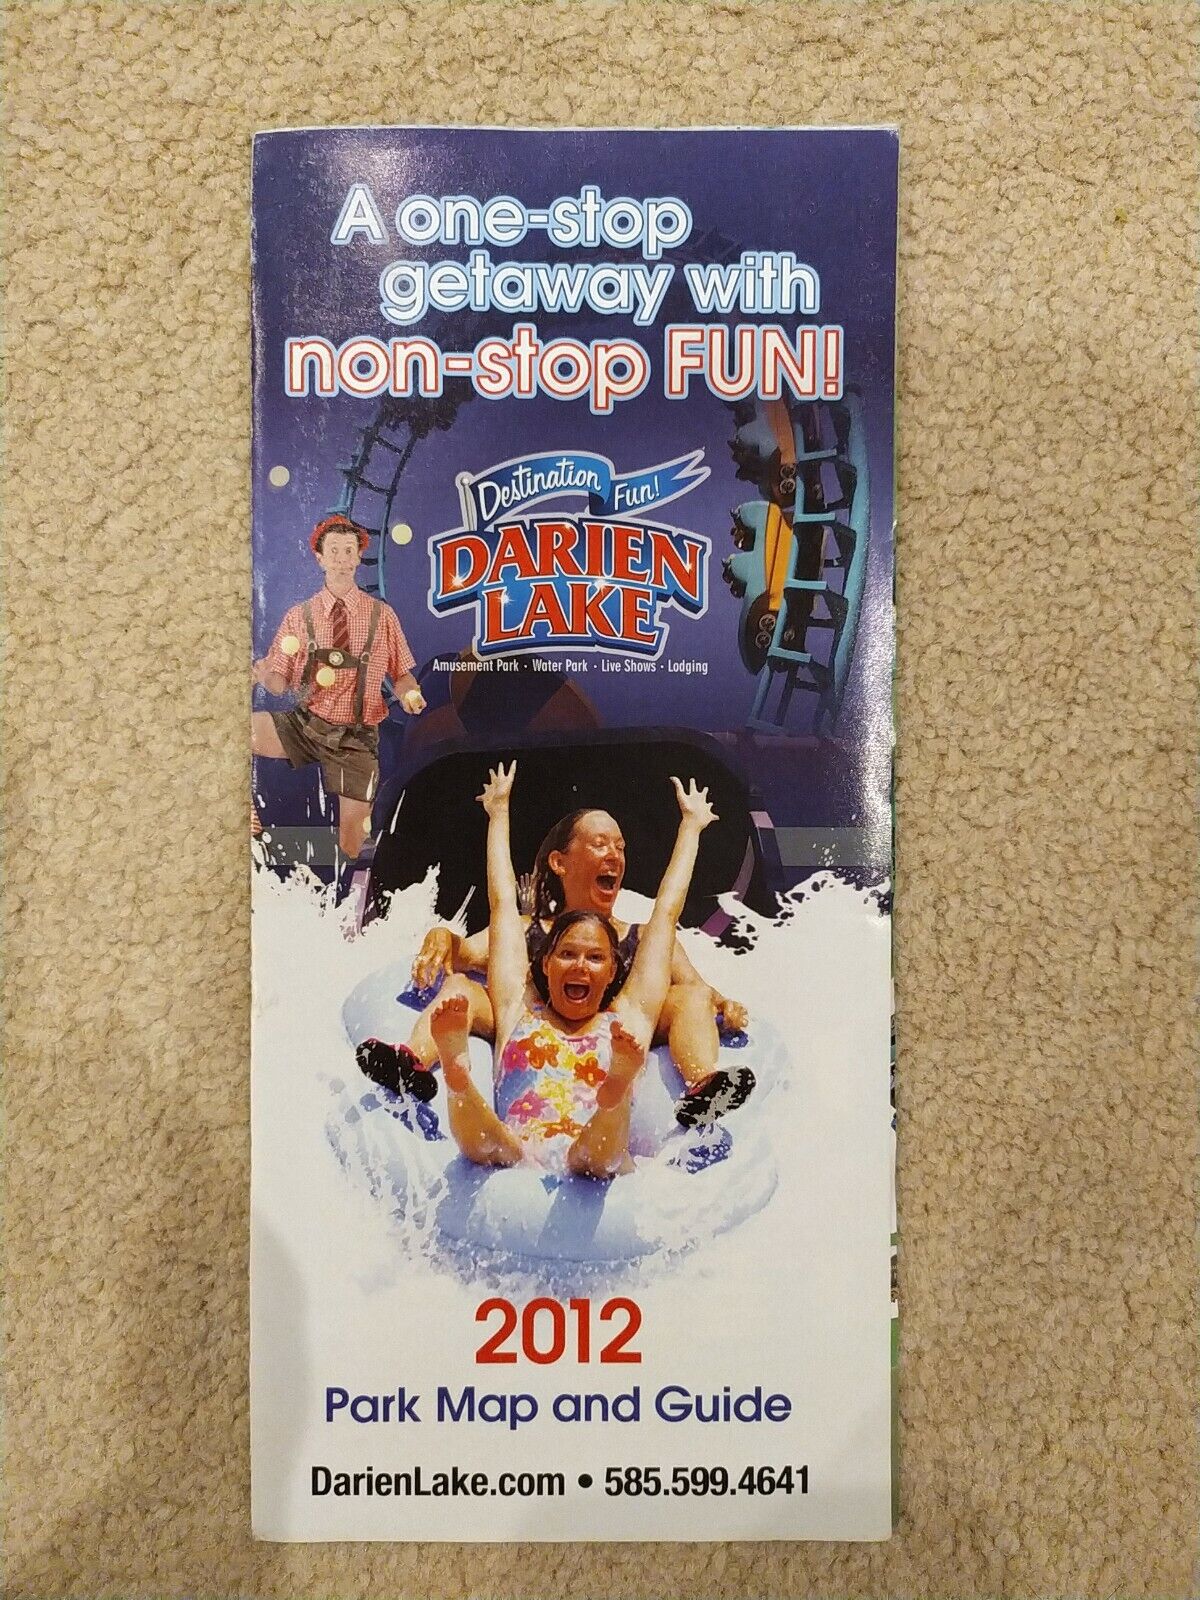 Darien Lake 2012 Theme Park Map And Guide - Immaculate Condition